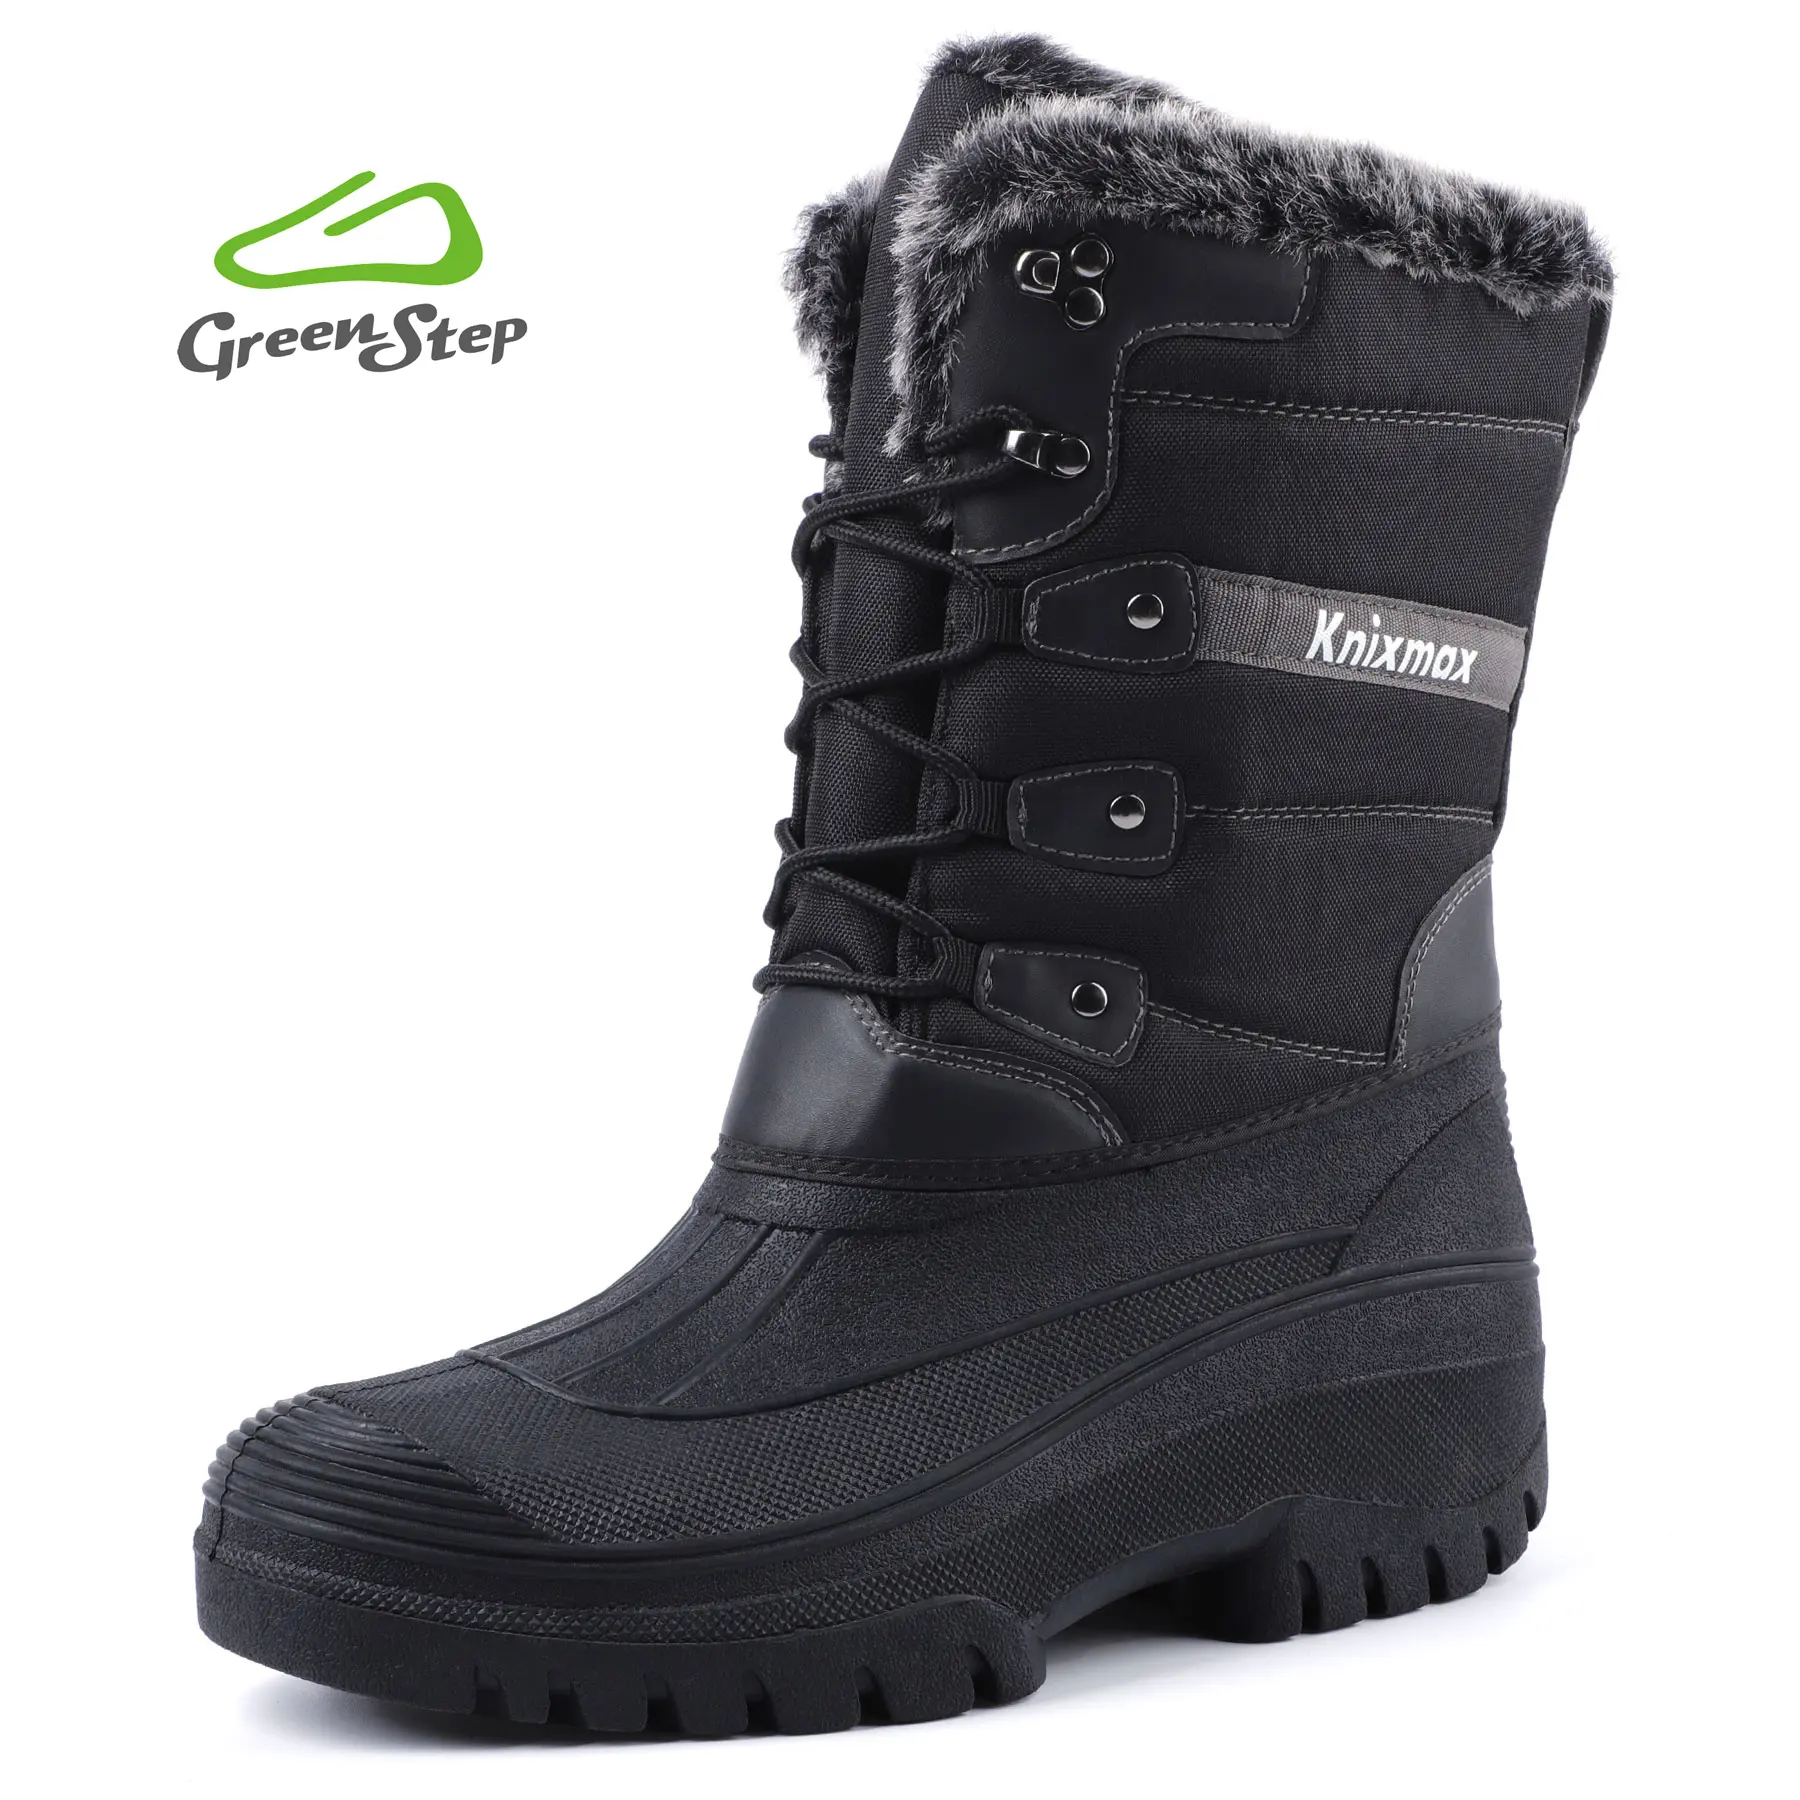 New style MOQ 1 black antislip winter shoes hiking boots waterproof outdoor women snow boots